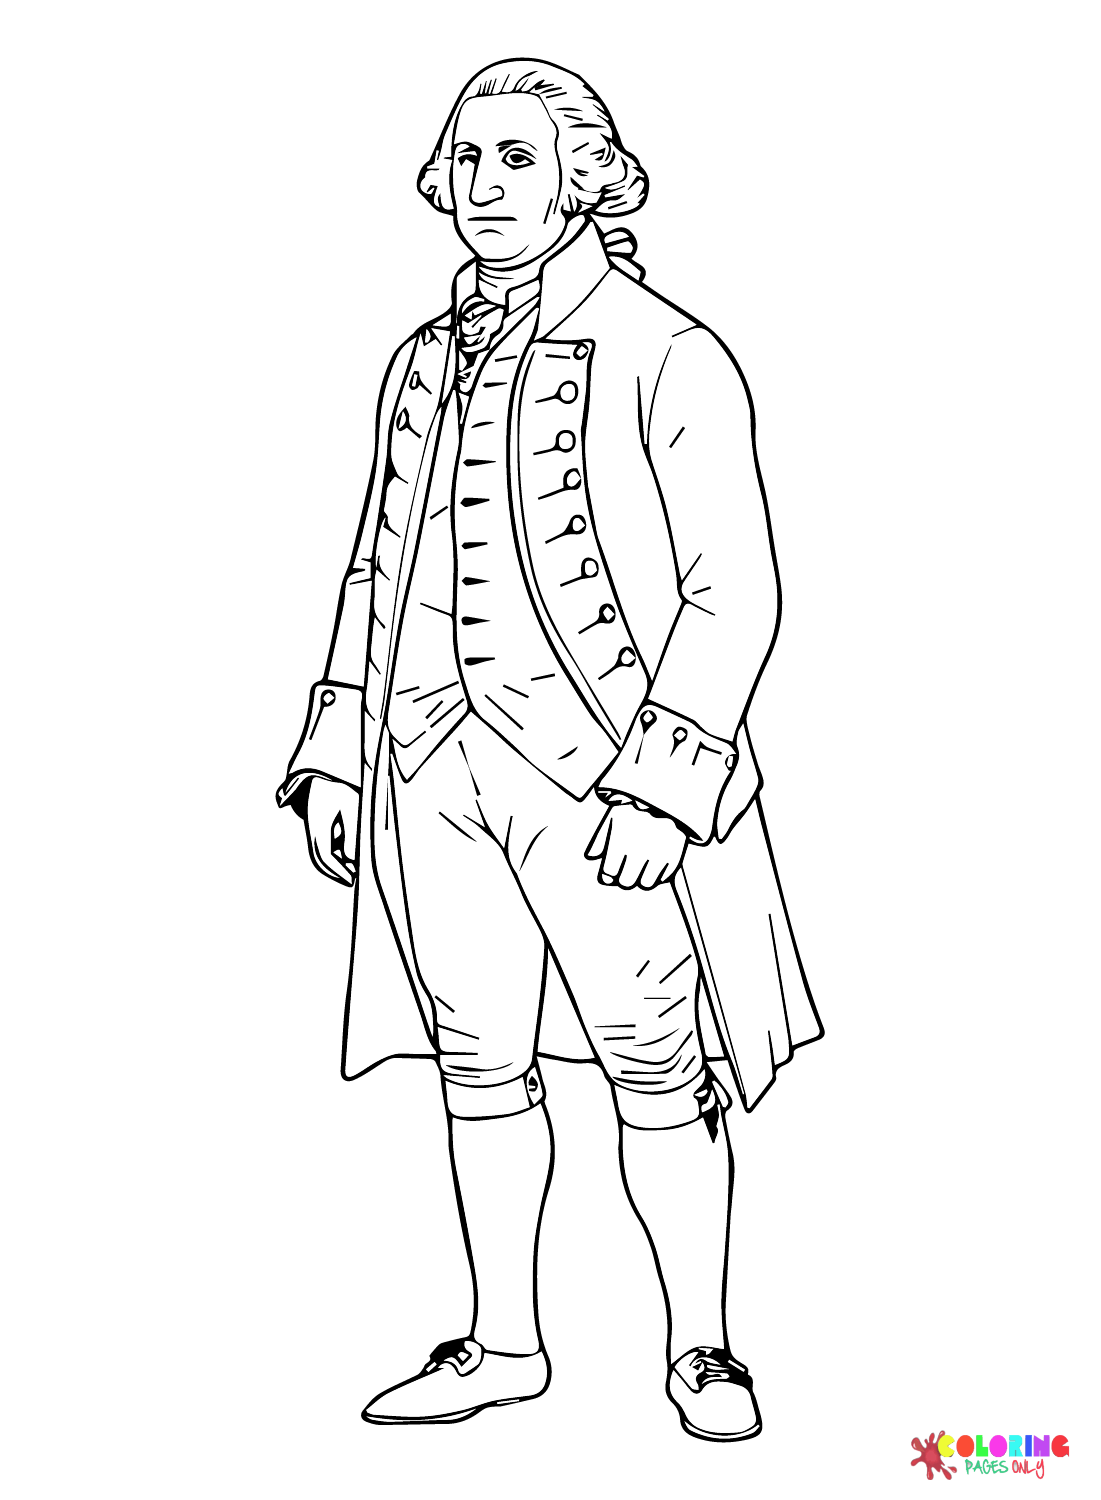 George Washington for Kids Coloring Page